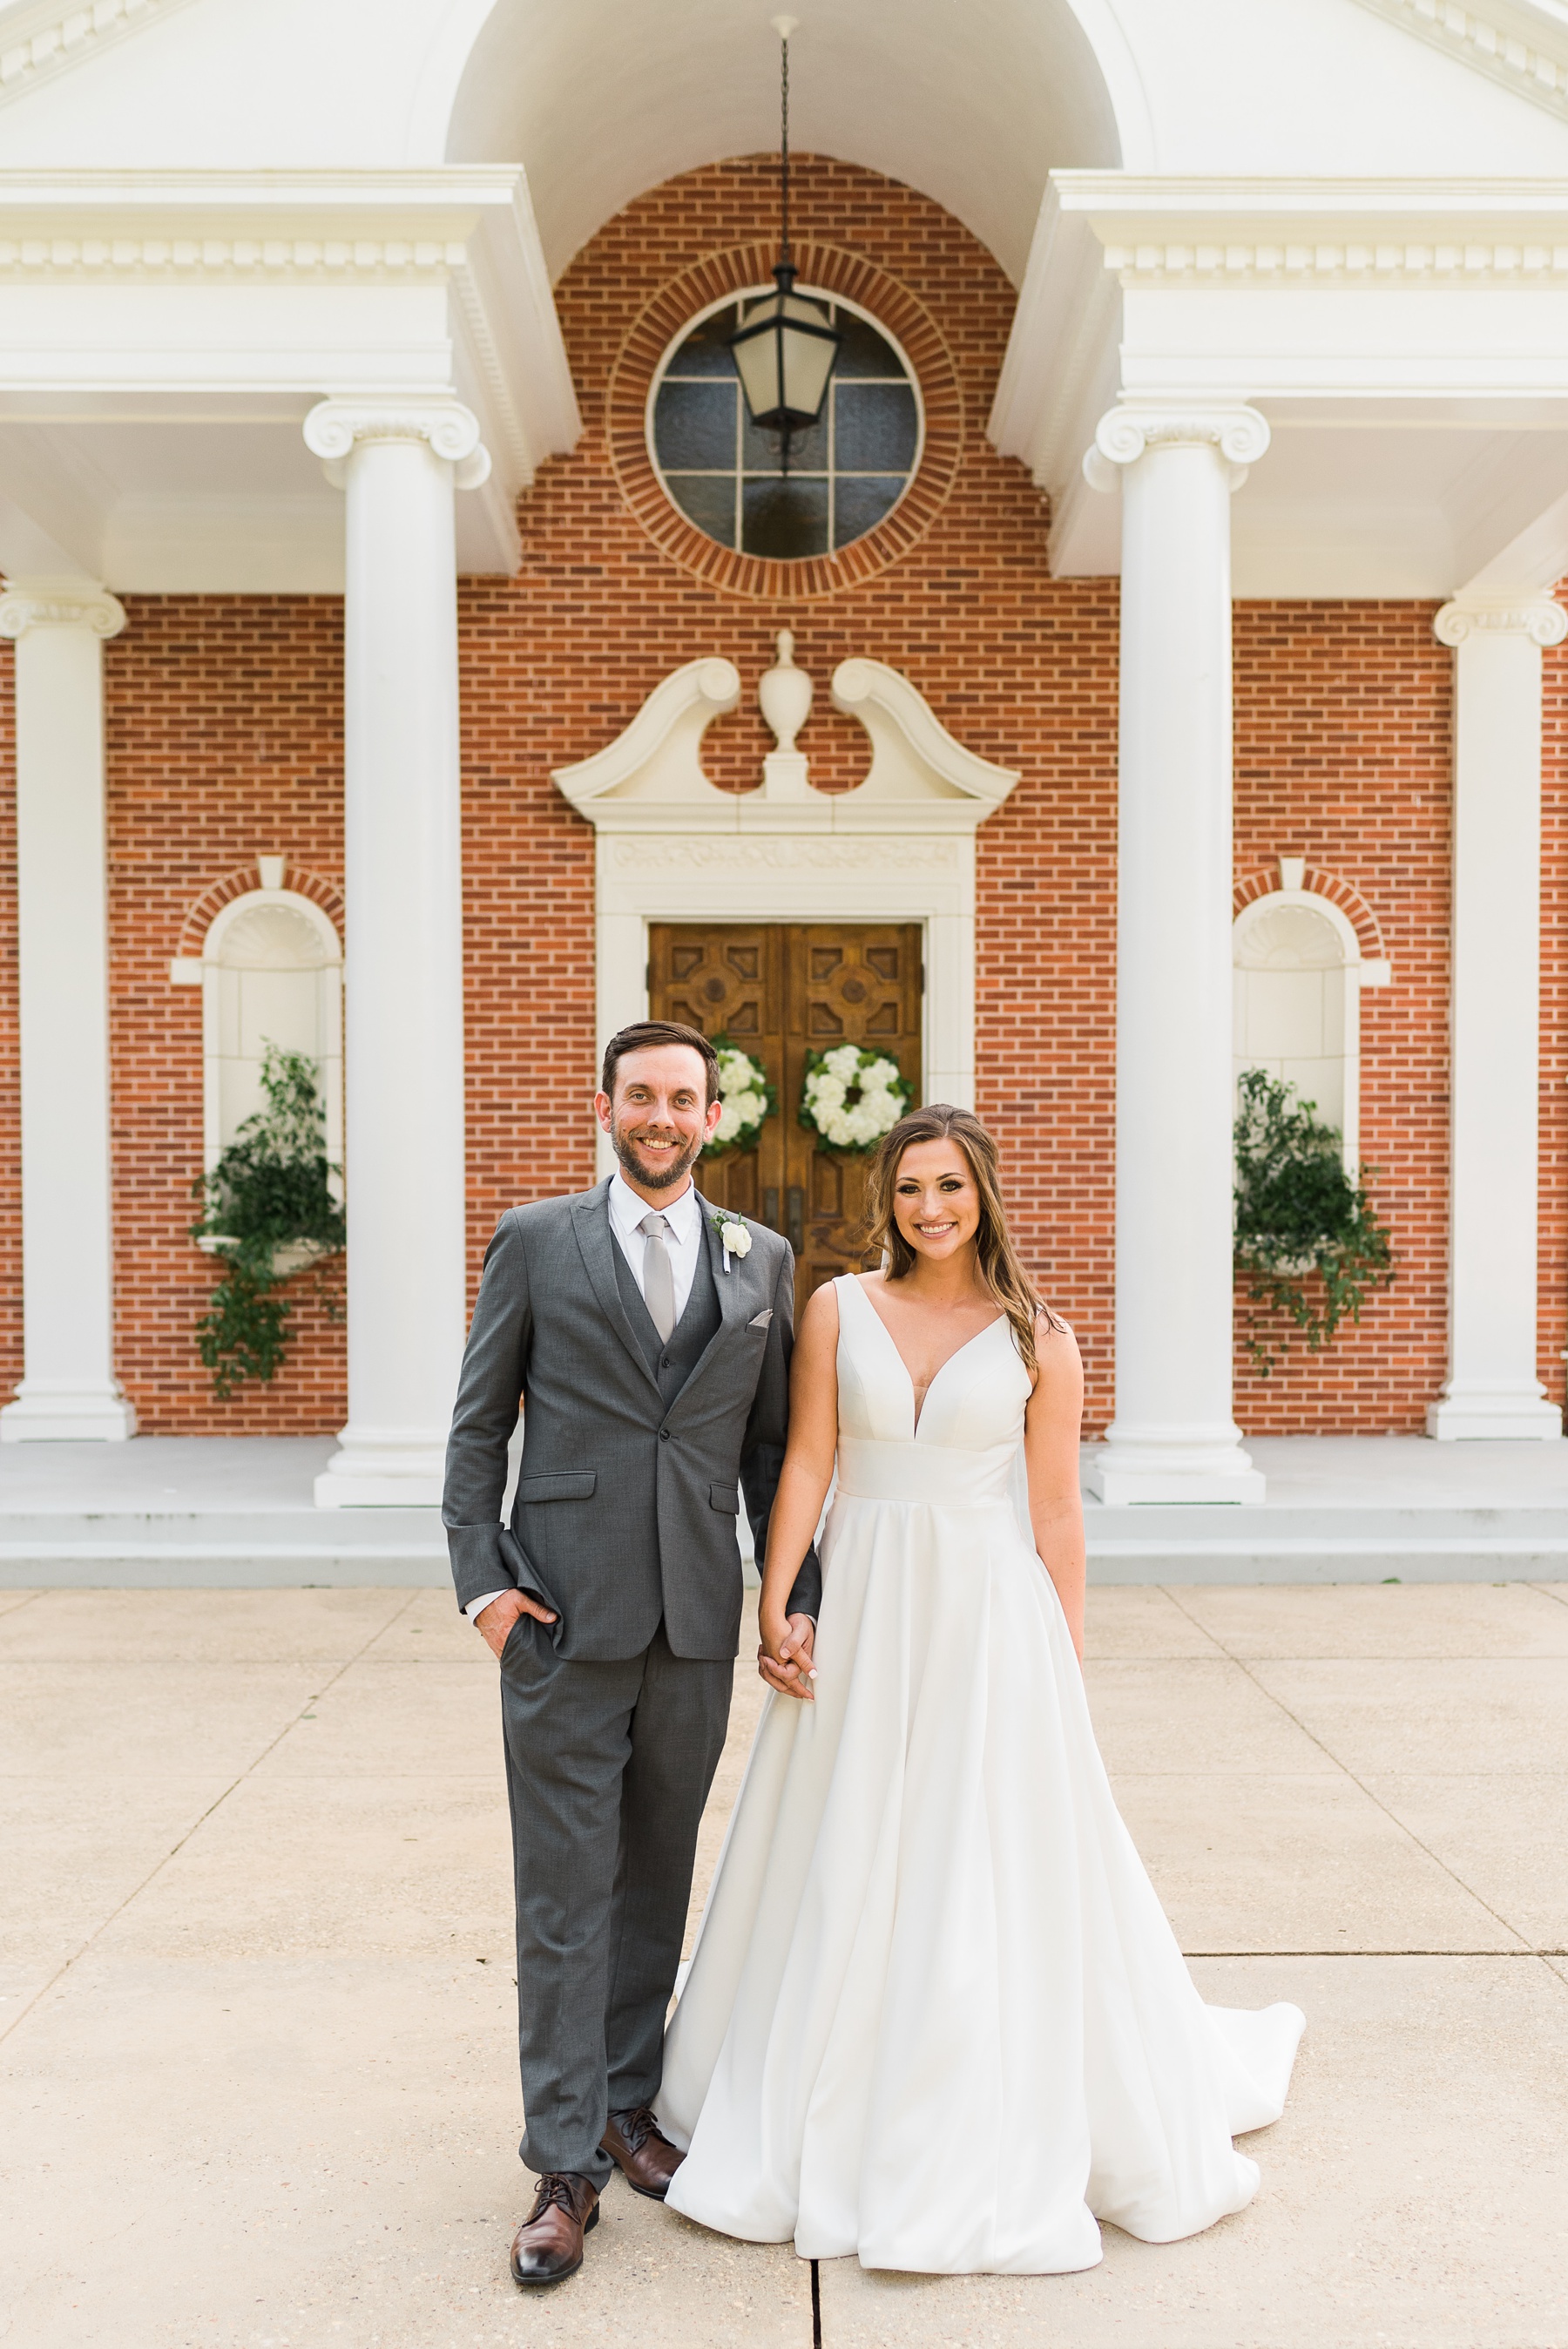 Bride and Groom Classic Portrait in front of Church